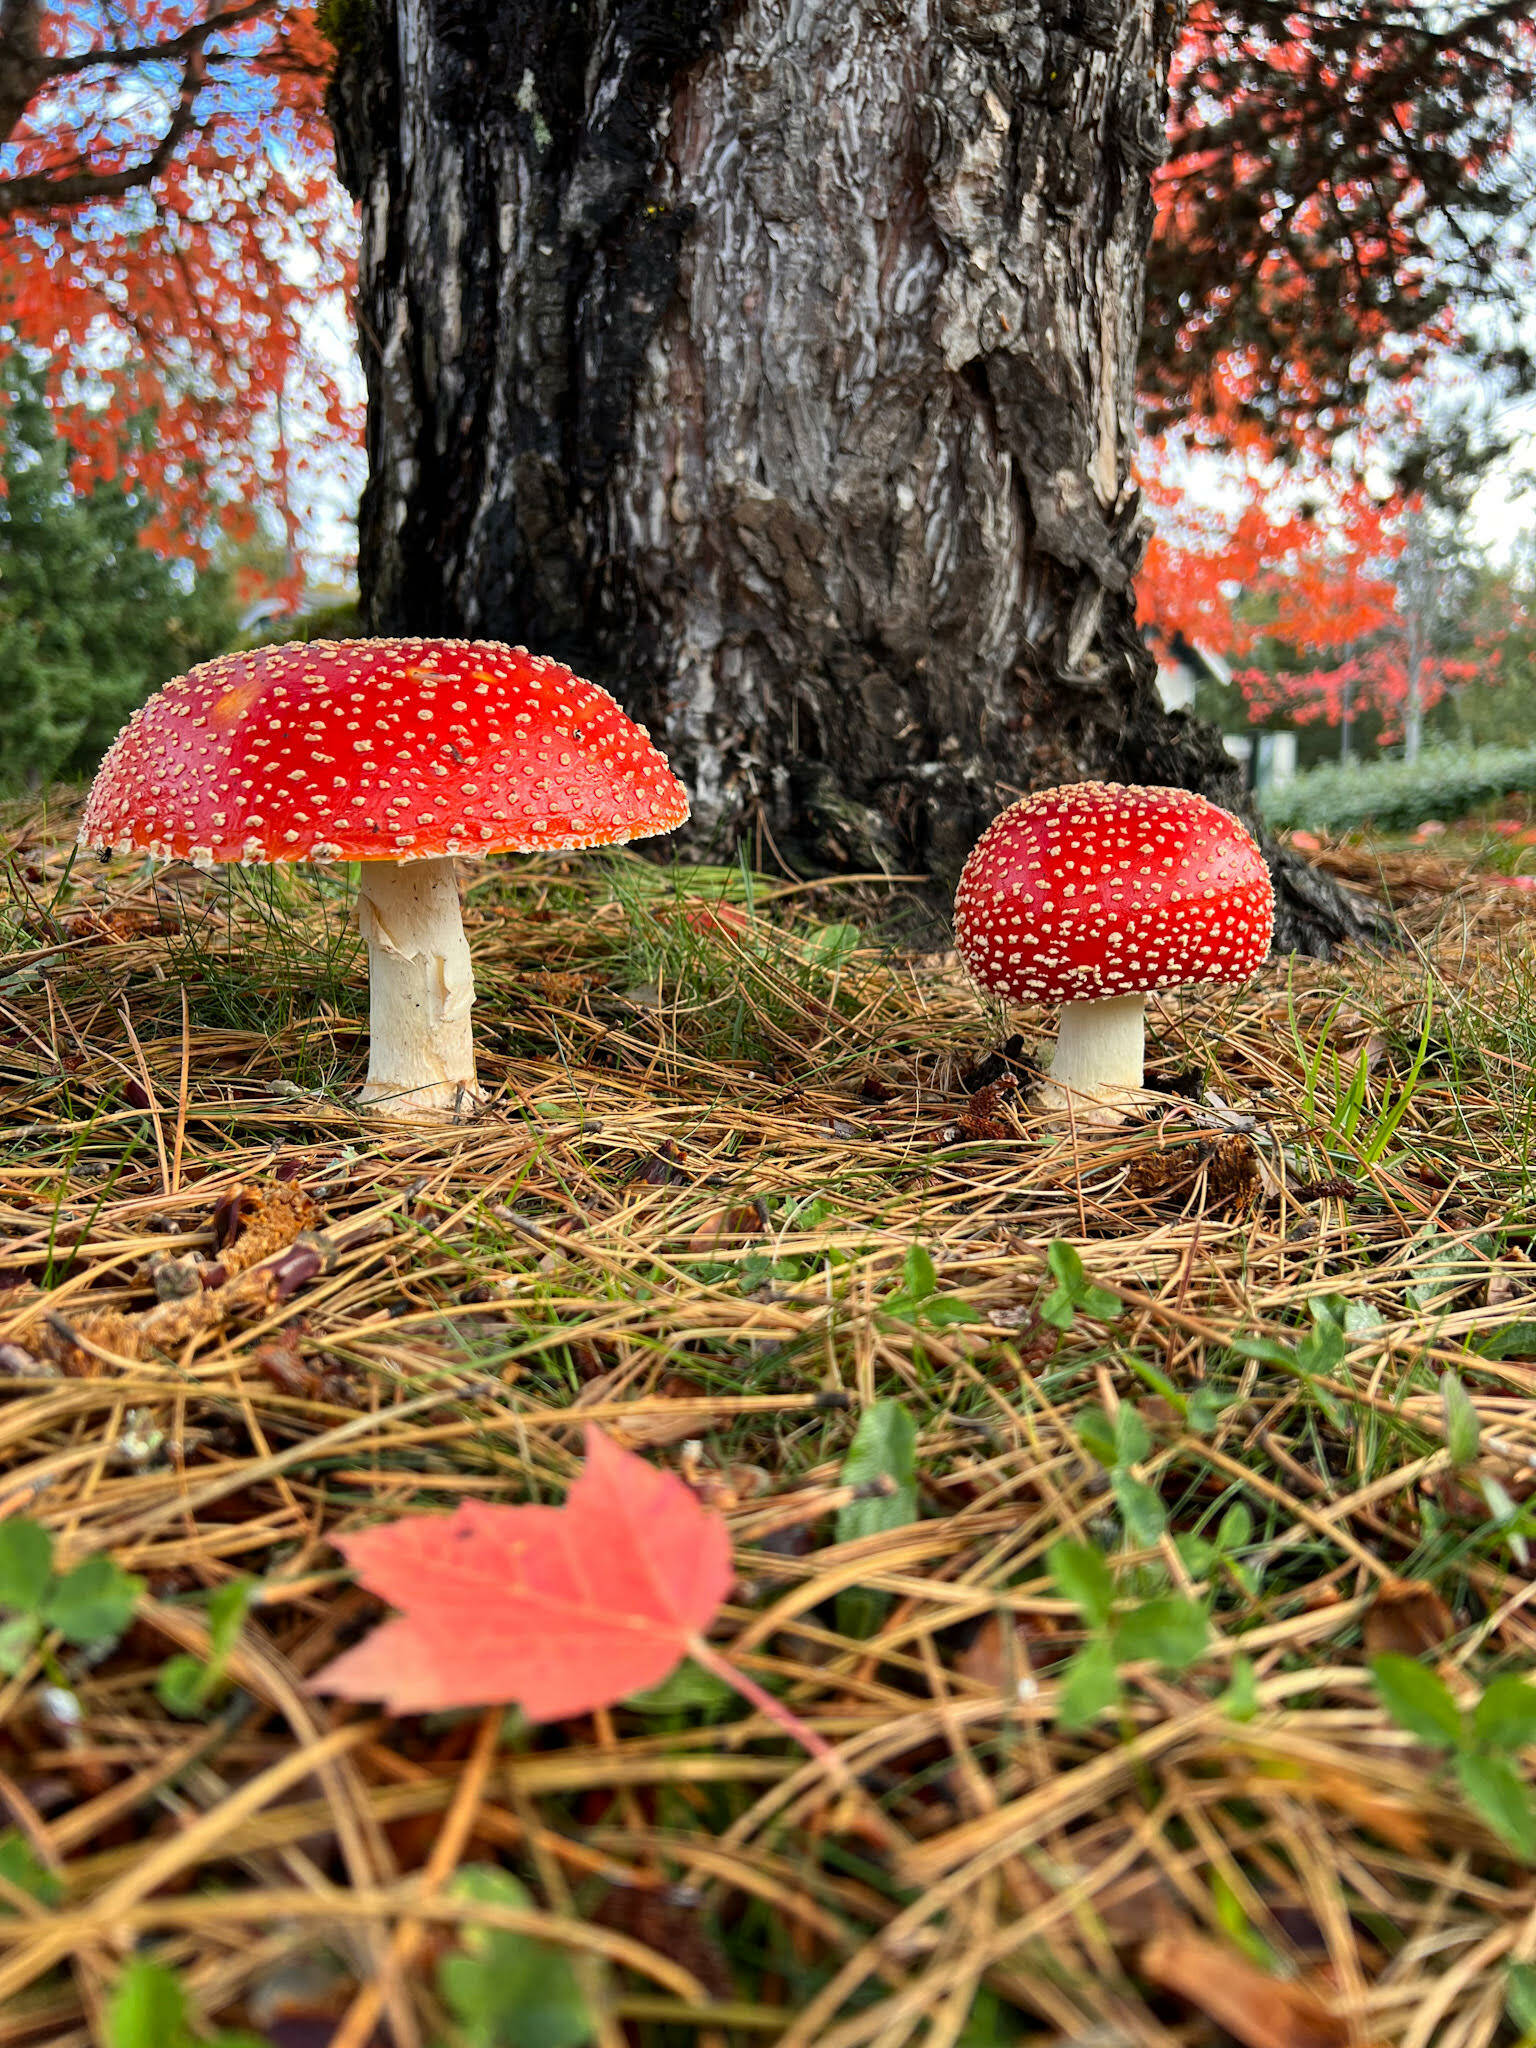 Did you see Mario? This large, red Amanita Muscaria mushroom, also known as Fly Agaric, was discovered in the planting strip near the Quality Inn & Suites on Hildebrand Lane NE on Bainbridge Island. These mushrooms usually grow in the woods, but do not collect or eat them; they are toxic. Nancy Treder/Bainbridge Island Review